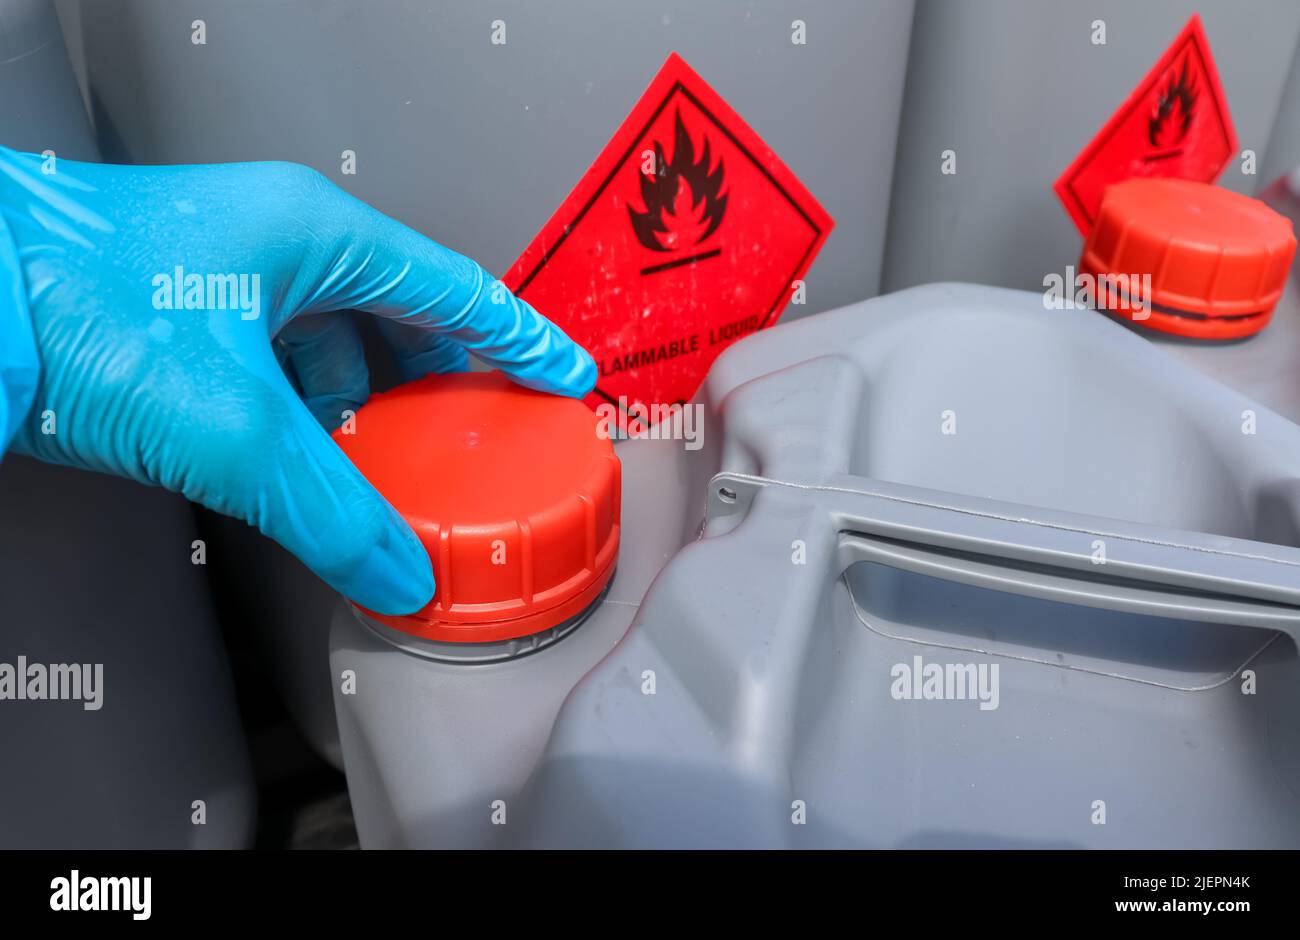 Open the lid of hazardous chemical tanks used in industry and laboratories Stock Photo